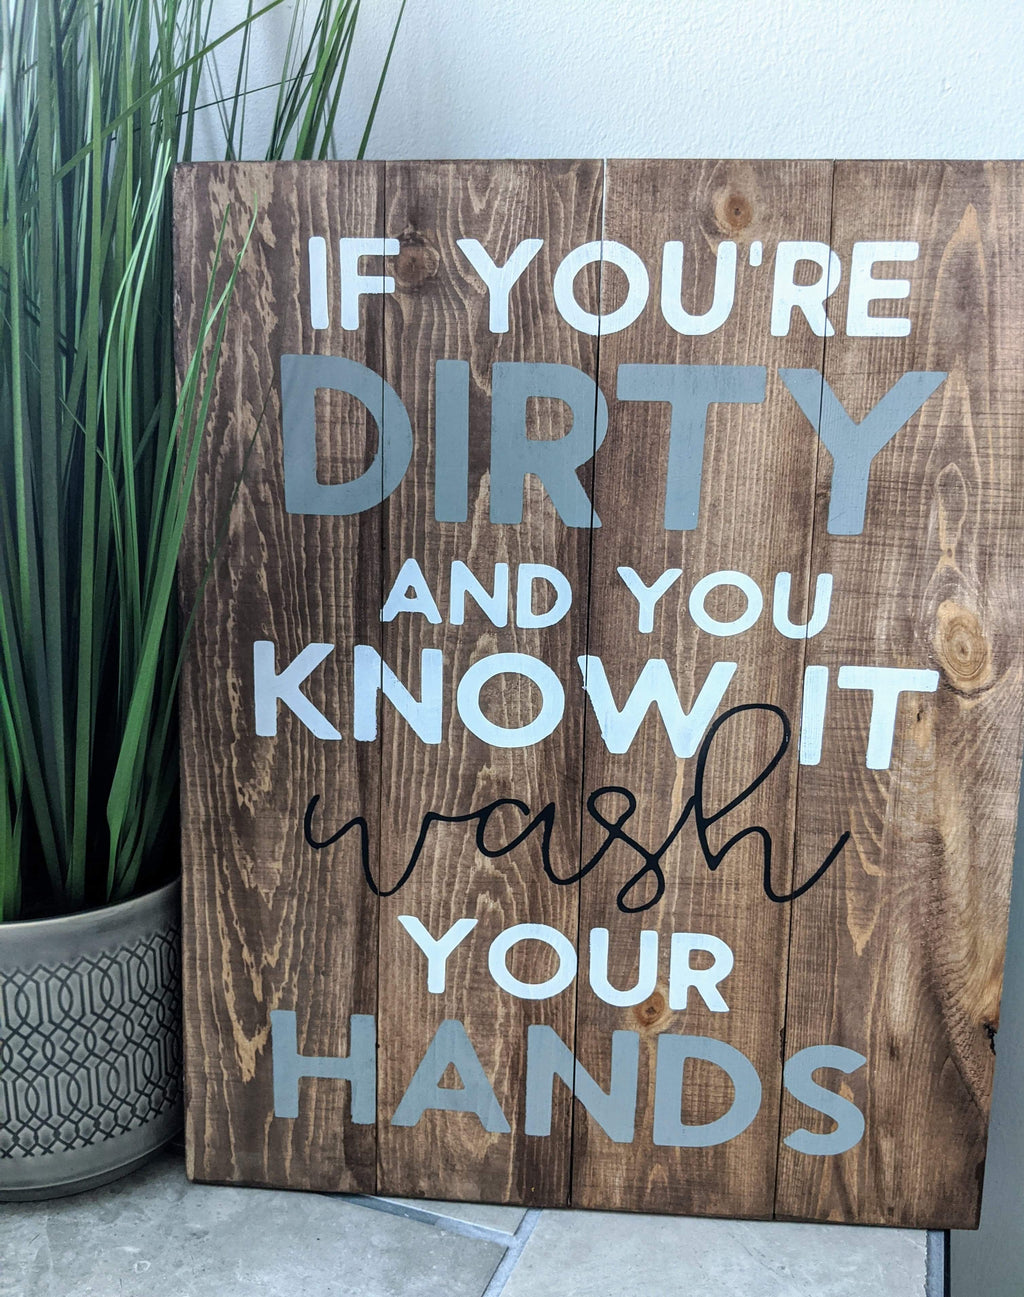 If your dirty and you know it wash your hands